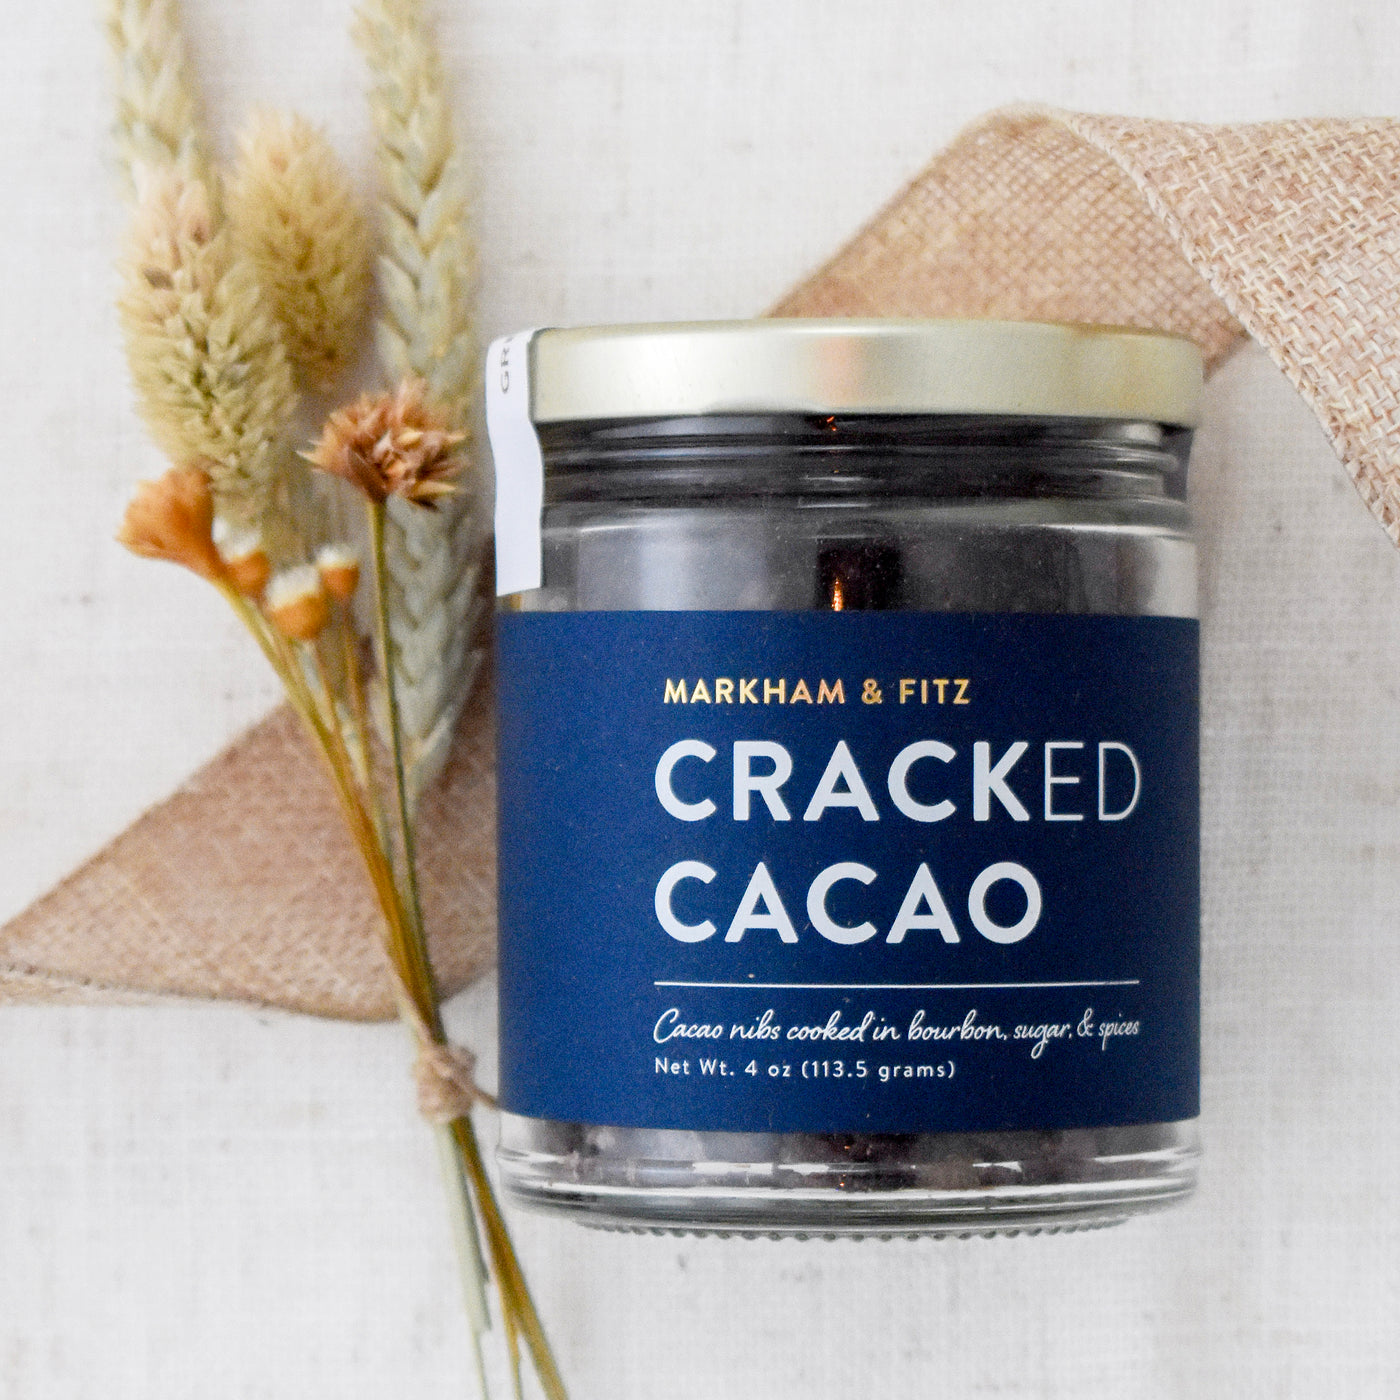 Encourage the break from reality to enjoy some sweet treats and a cup of joe. Close up of Cracked Cacao